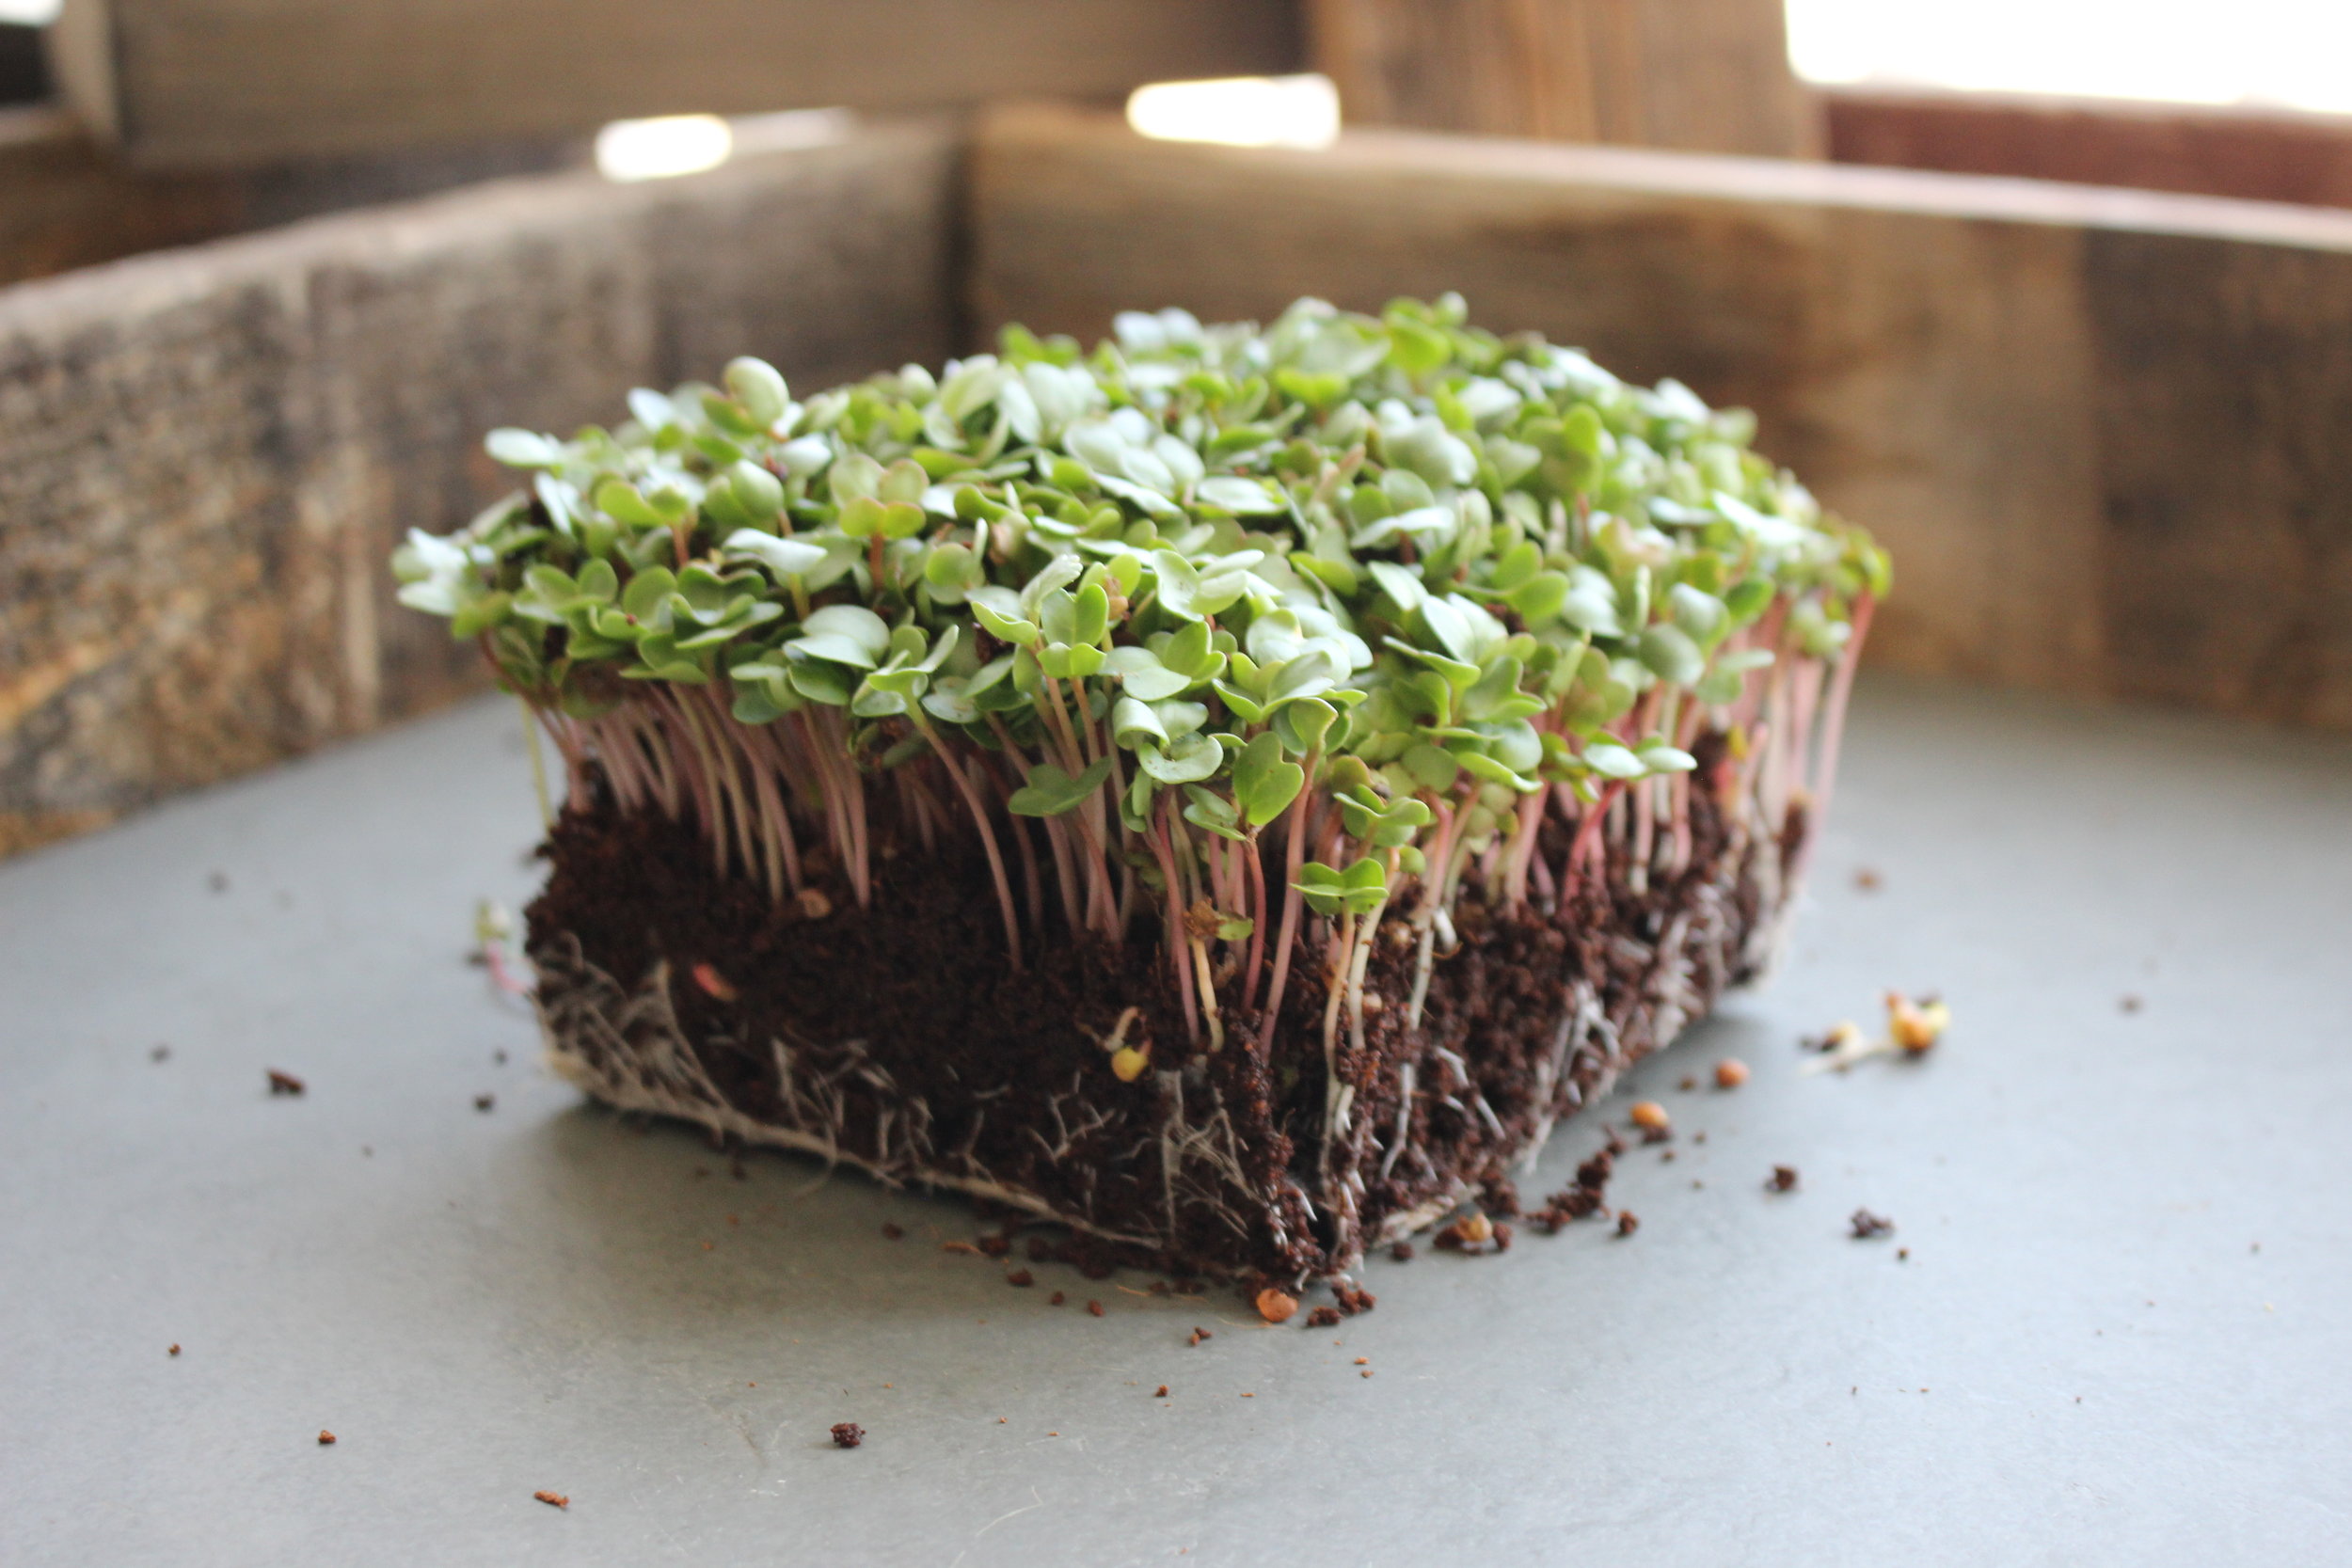  Radish microgreens grow to a harvestable size very quickly. They add a spicy kick to salads and sandwiches. 